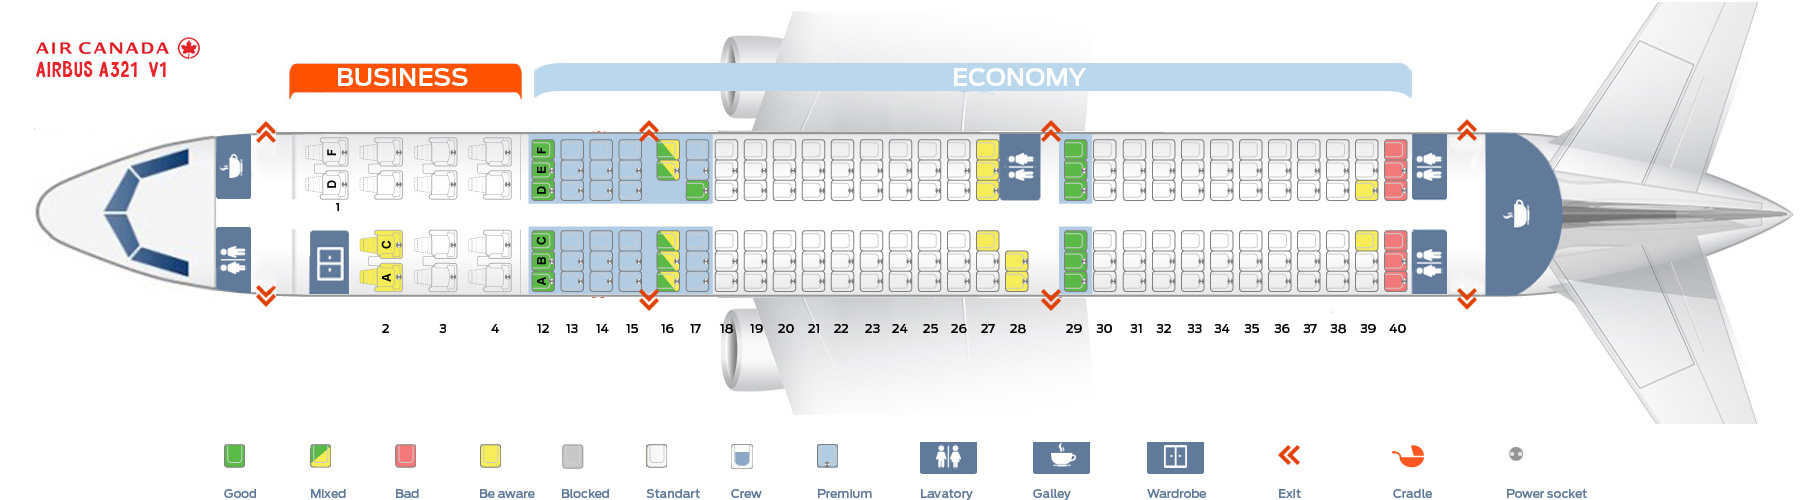 Seat map and seating chart Airbus A321 200 Air Canada V1